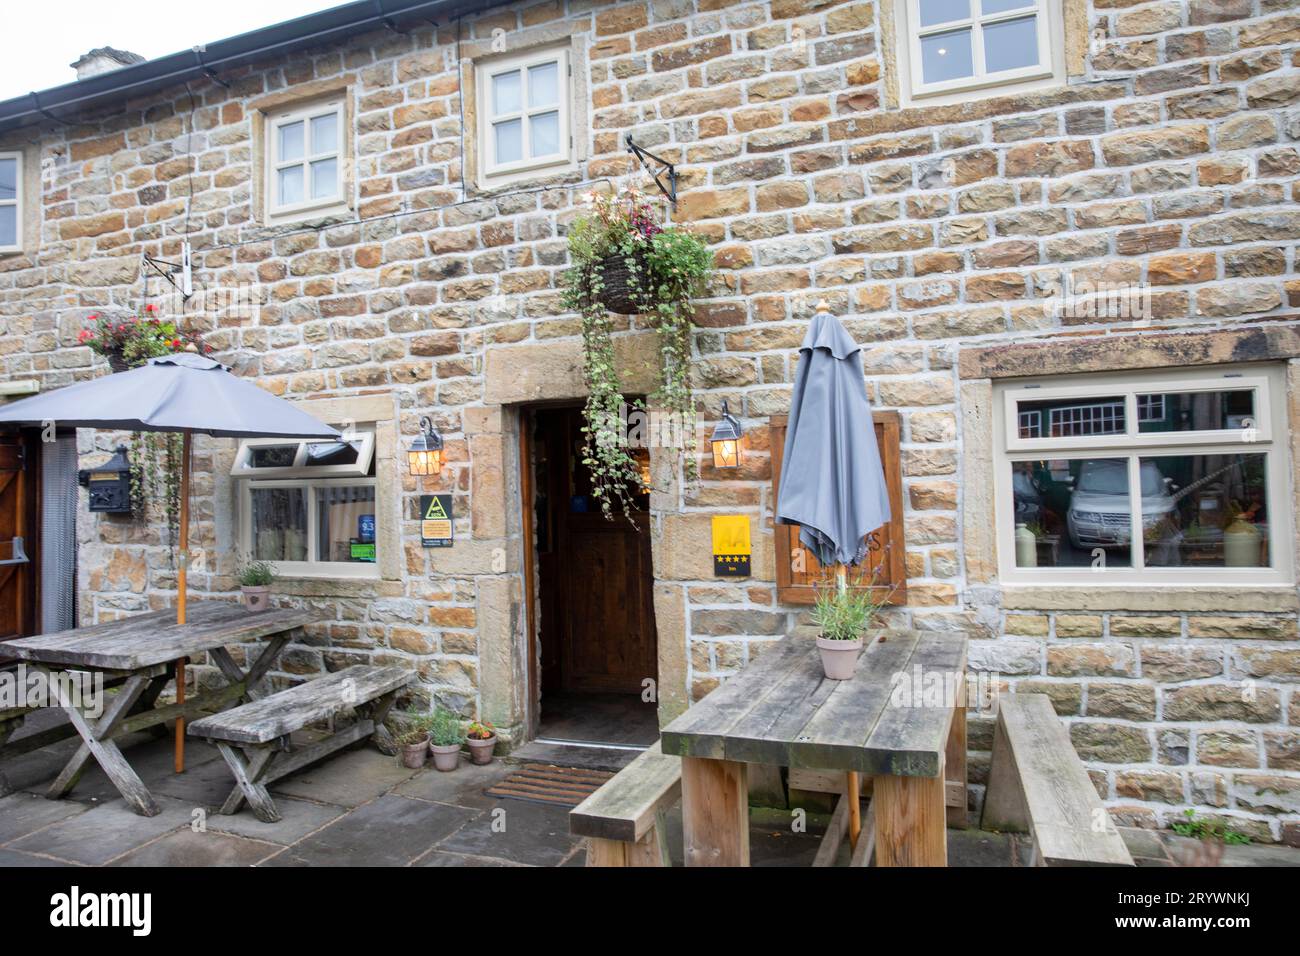 Barley Mow pub, restaurant and hotel in the Lancashire village of Barley, popular with those walking Pendle Hill,Lancashire,England,UK Stock Photo